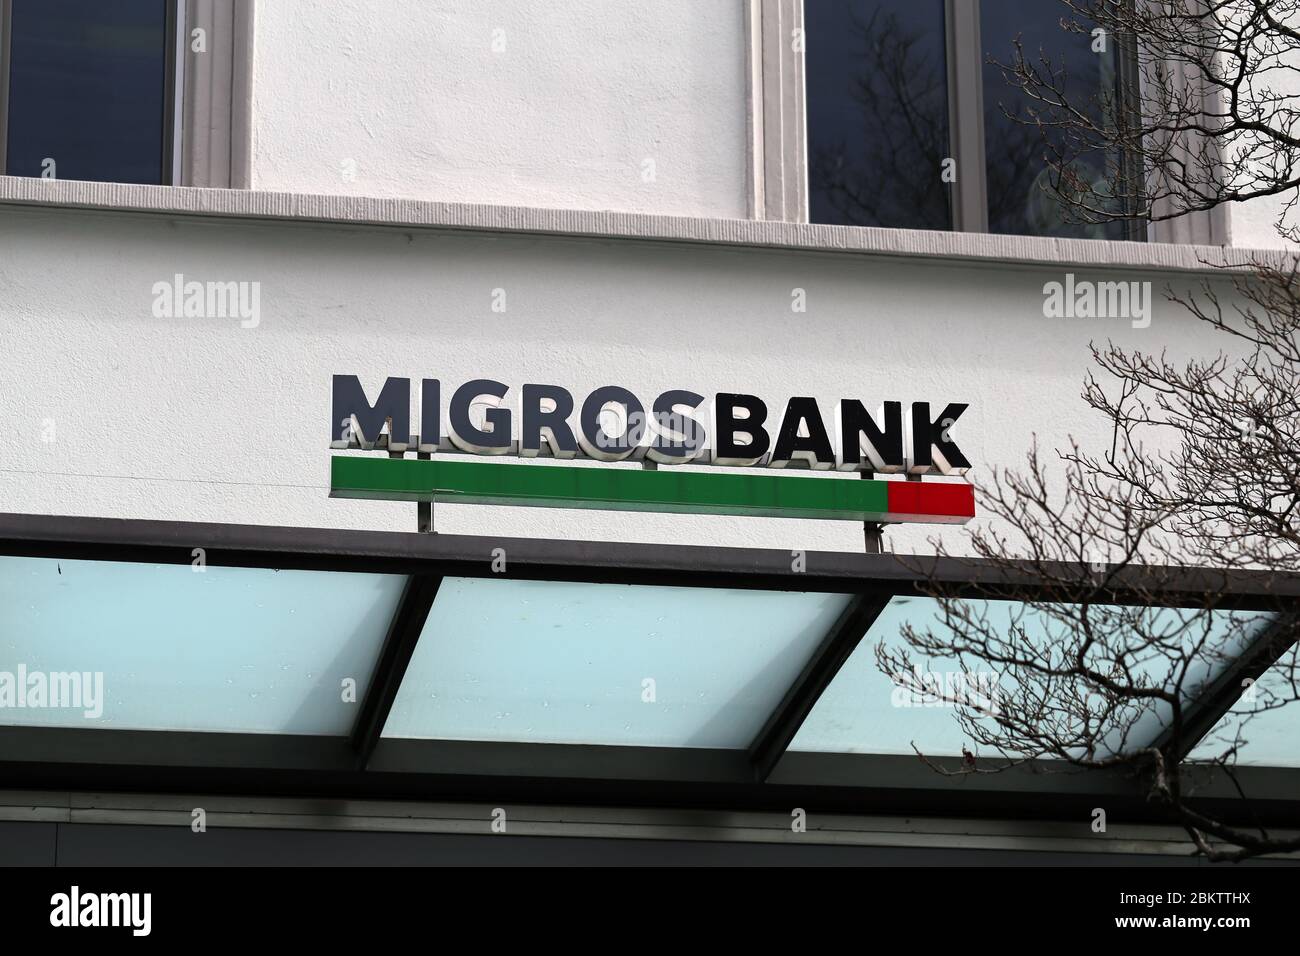 Migros Bank sign in downtown Zürich, Switzerland, March 2020. Migros Bank is a Swiss cooperative bank providing wide range of banking services. Stock Photo